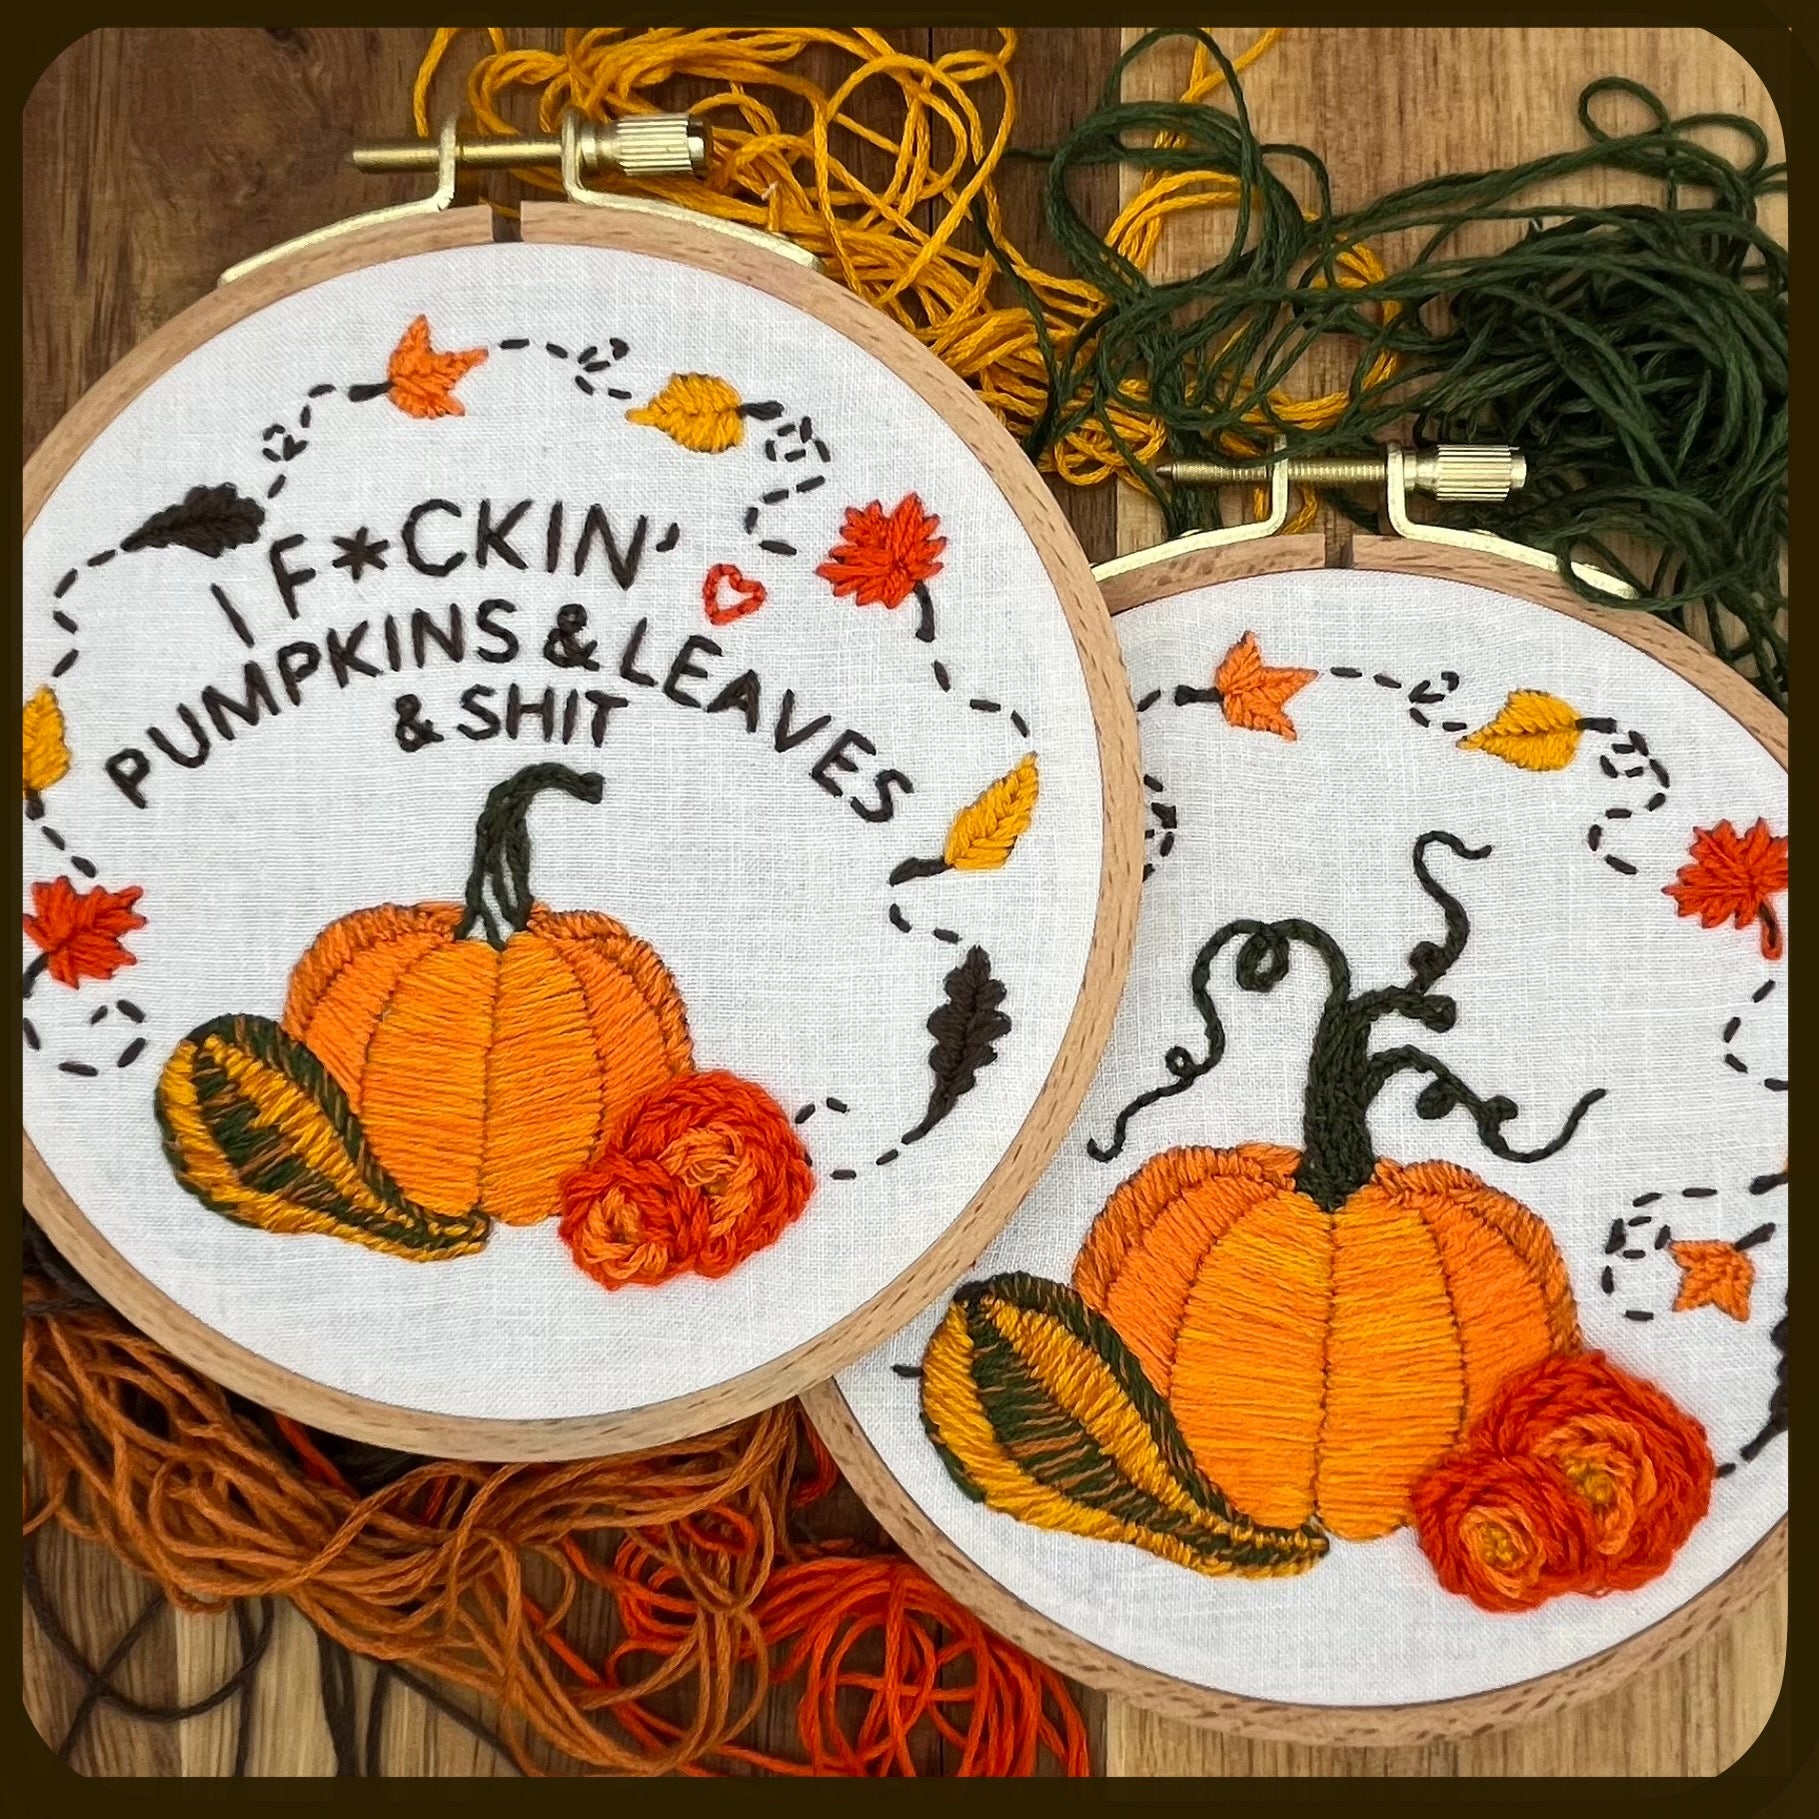 Autumn Visions Embroidery Workshop- Thursday 10/5 6:30-8:30pm